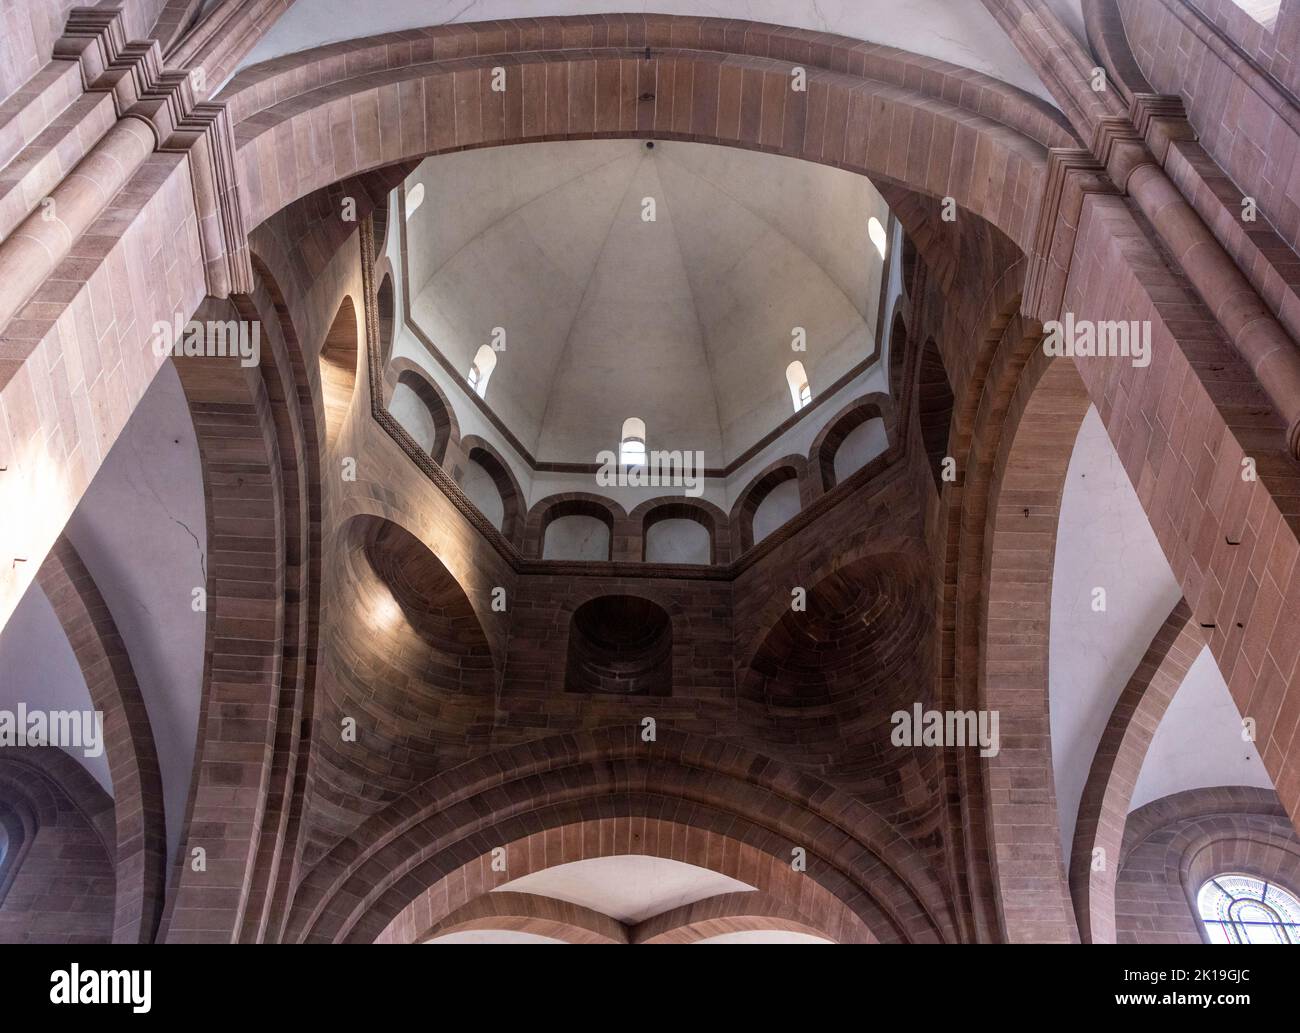 St Peter's Cathedral, Wormser Dom, Worms, Rhineland-Palatinate, Germany Stock Photo